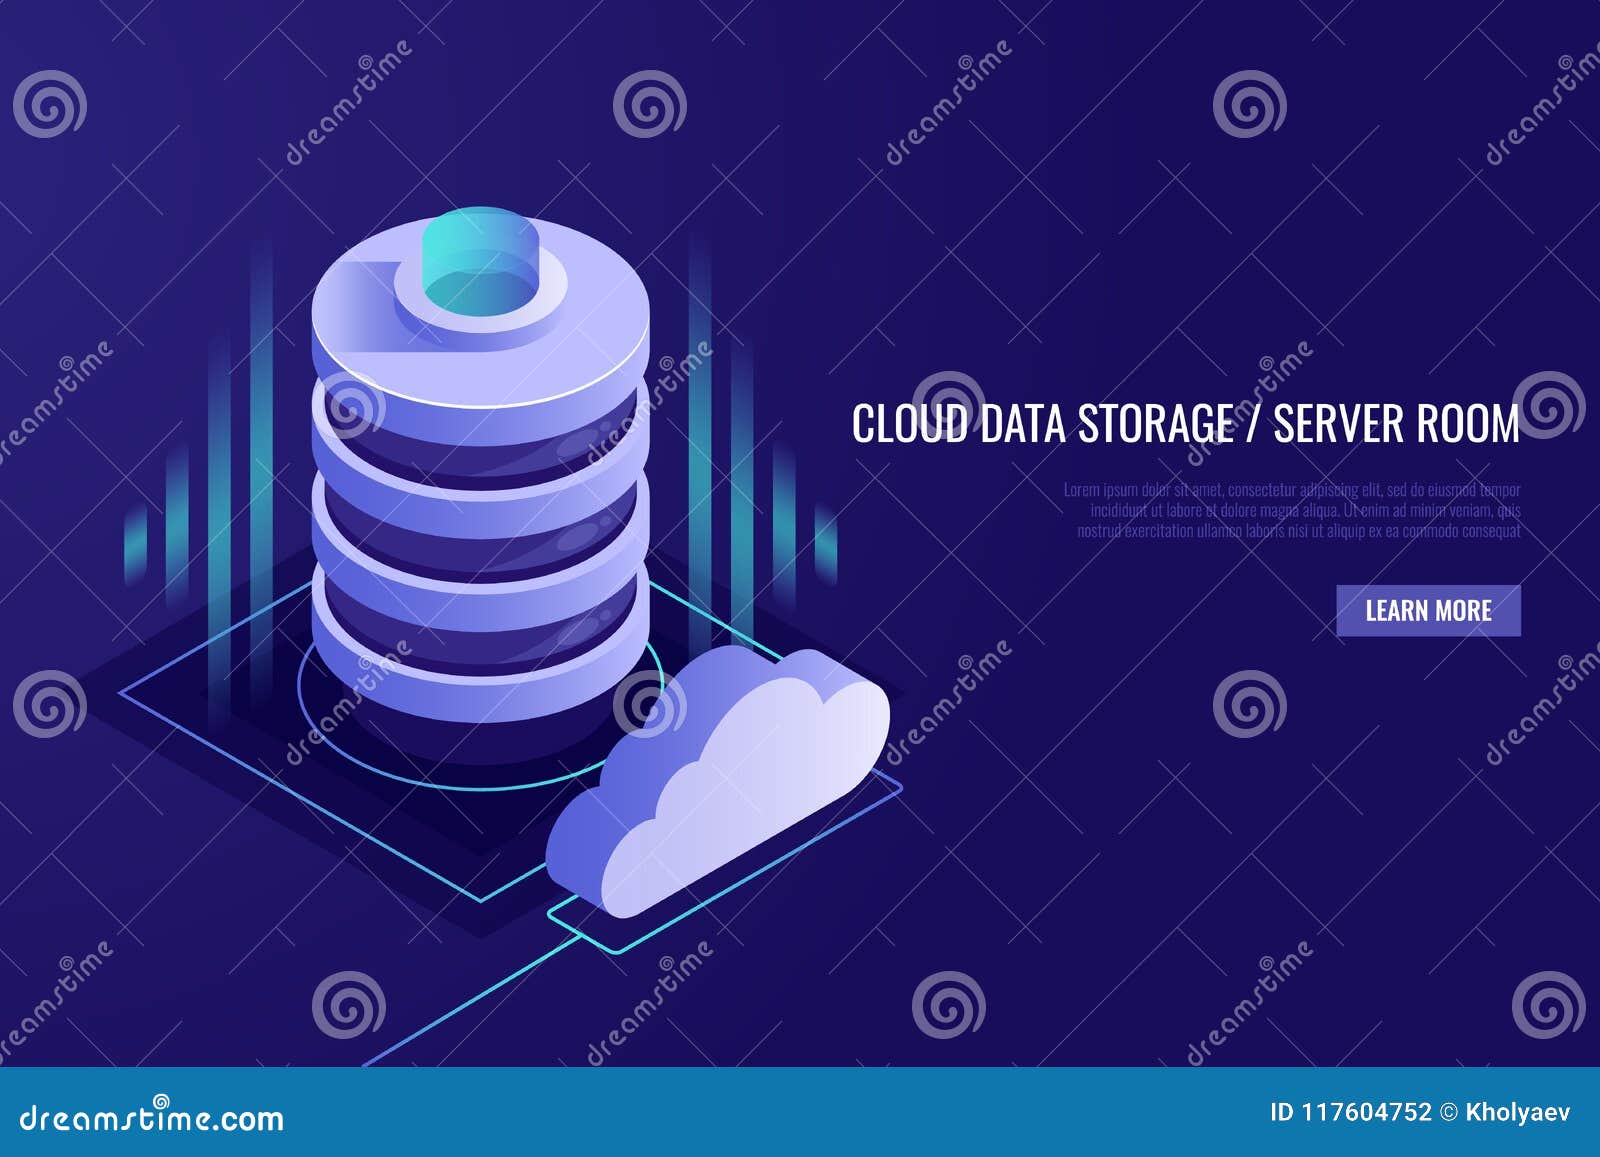 cloud computing concept. .web hosting and cloud technology.data protection,database security.isometric style